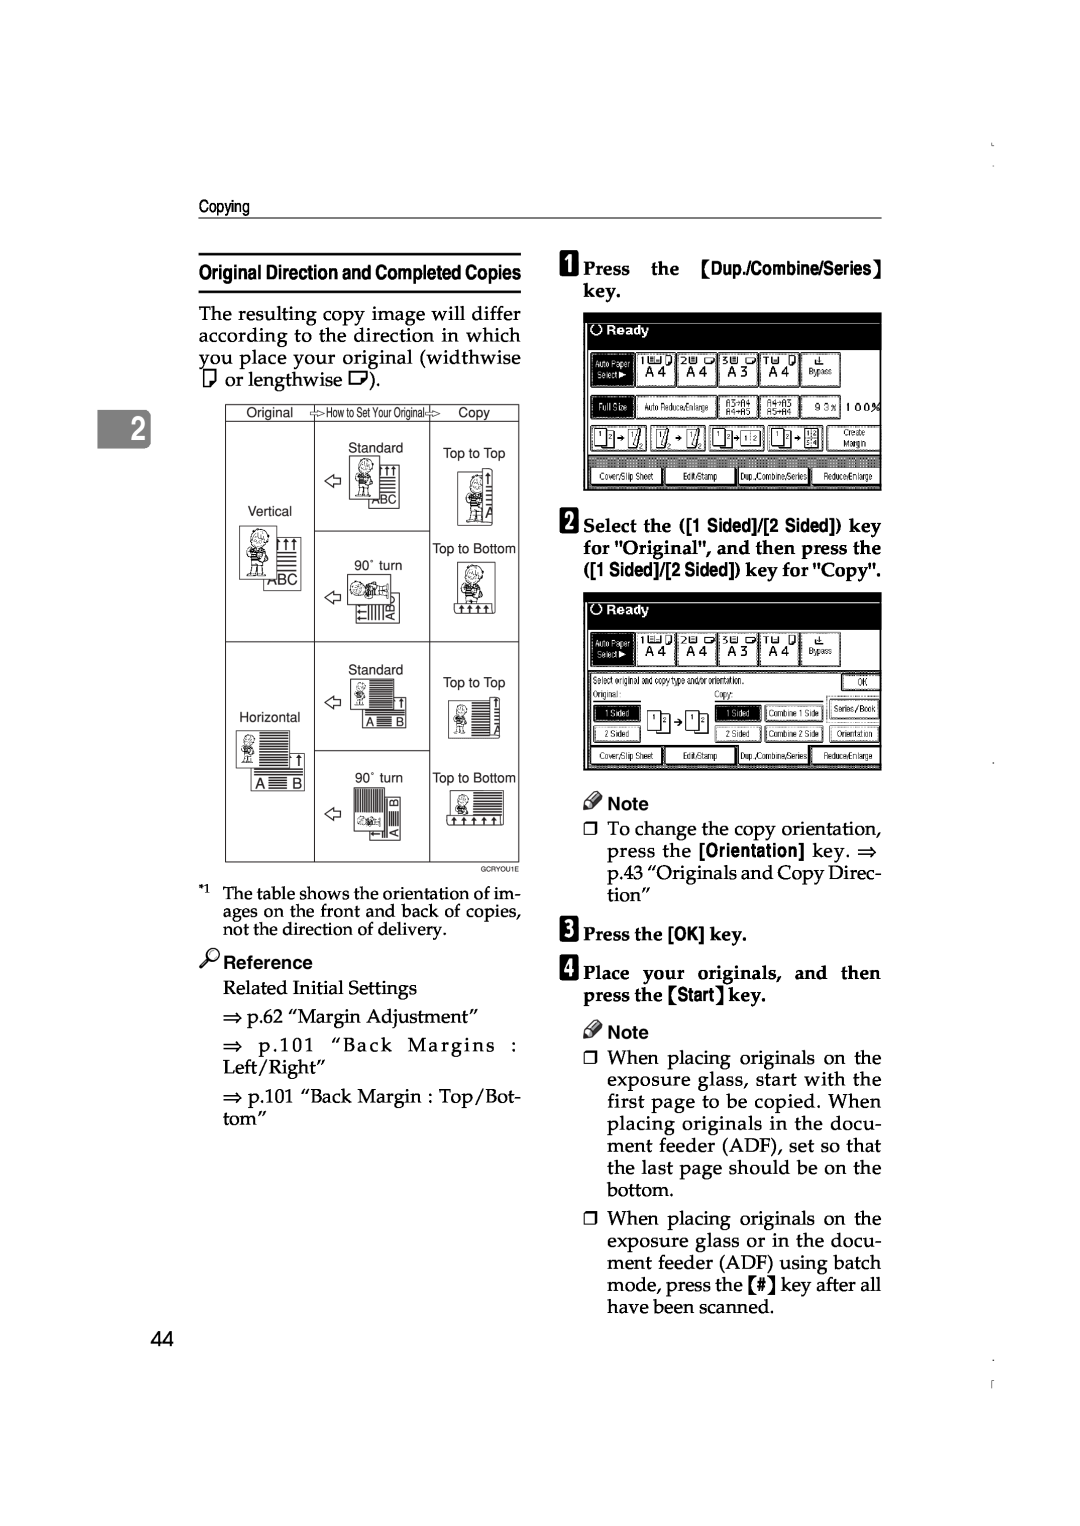 Lanier LD075 manual A Press the Dup./Combine/Series, Reference, C Press the OK key, Original Direction and Completed Copies 